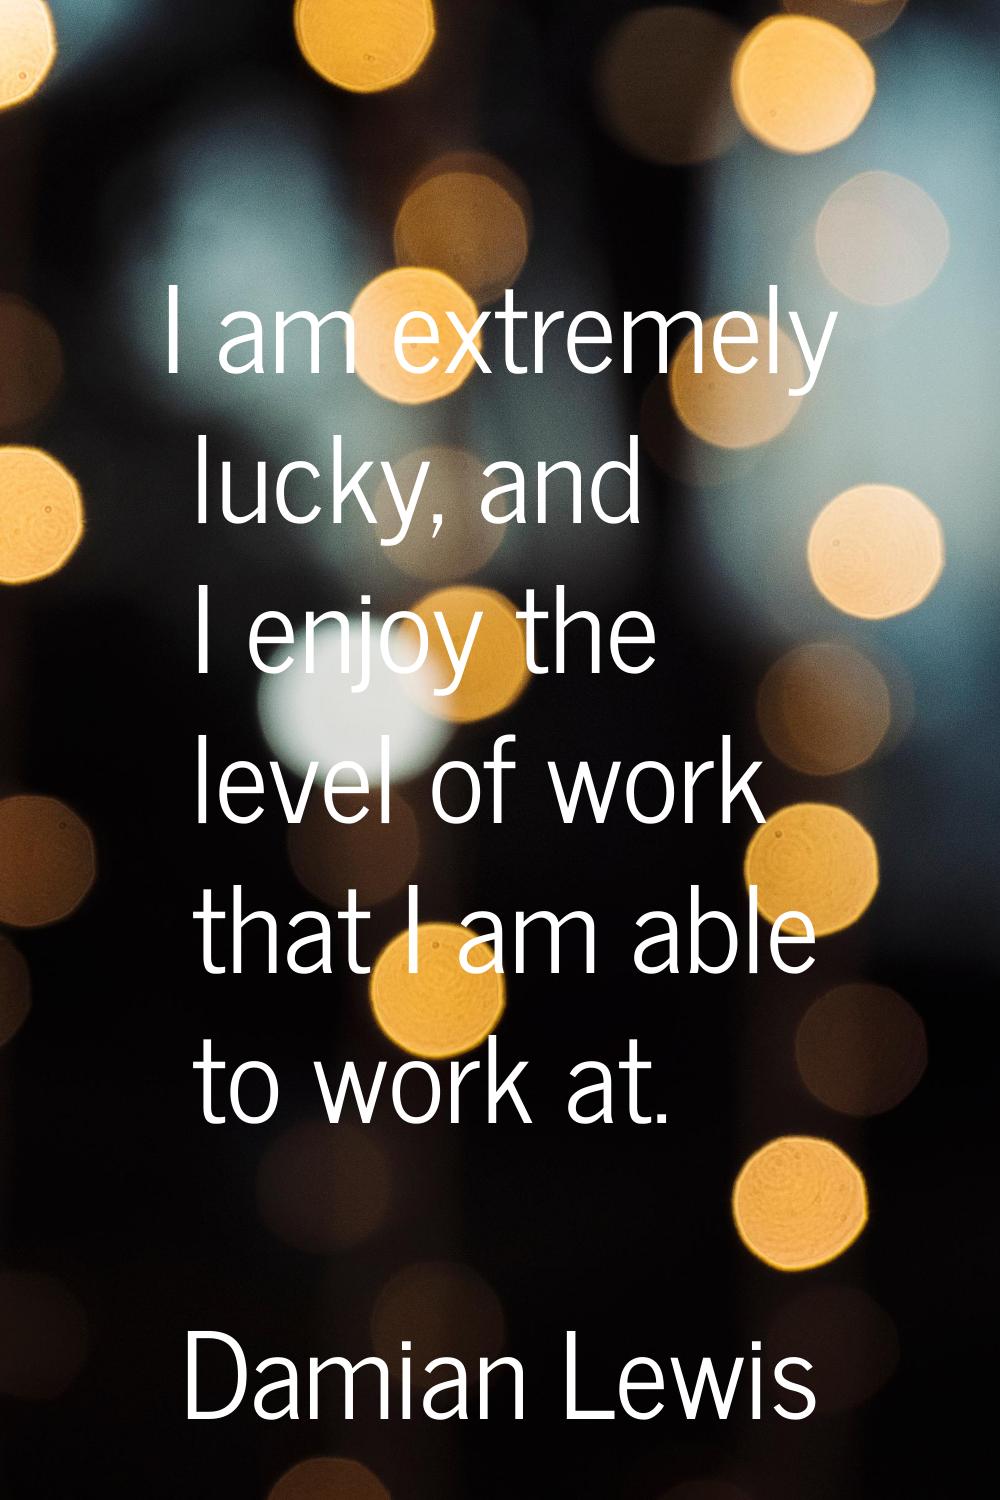 I am extremely lucky, and I enjoy the level of work that I am able to work at.